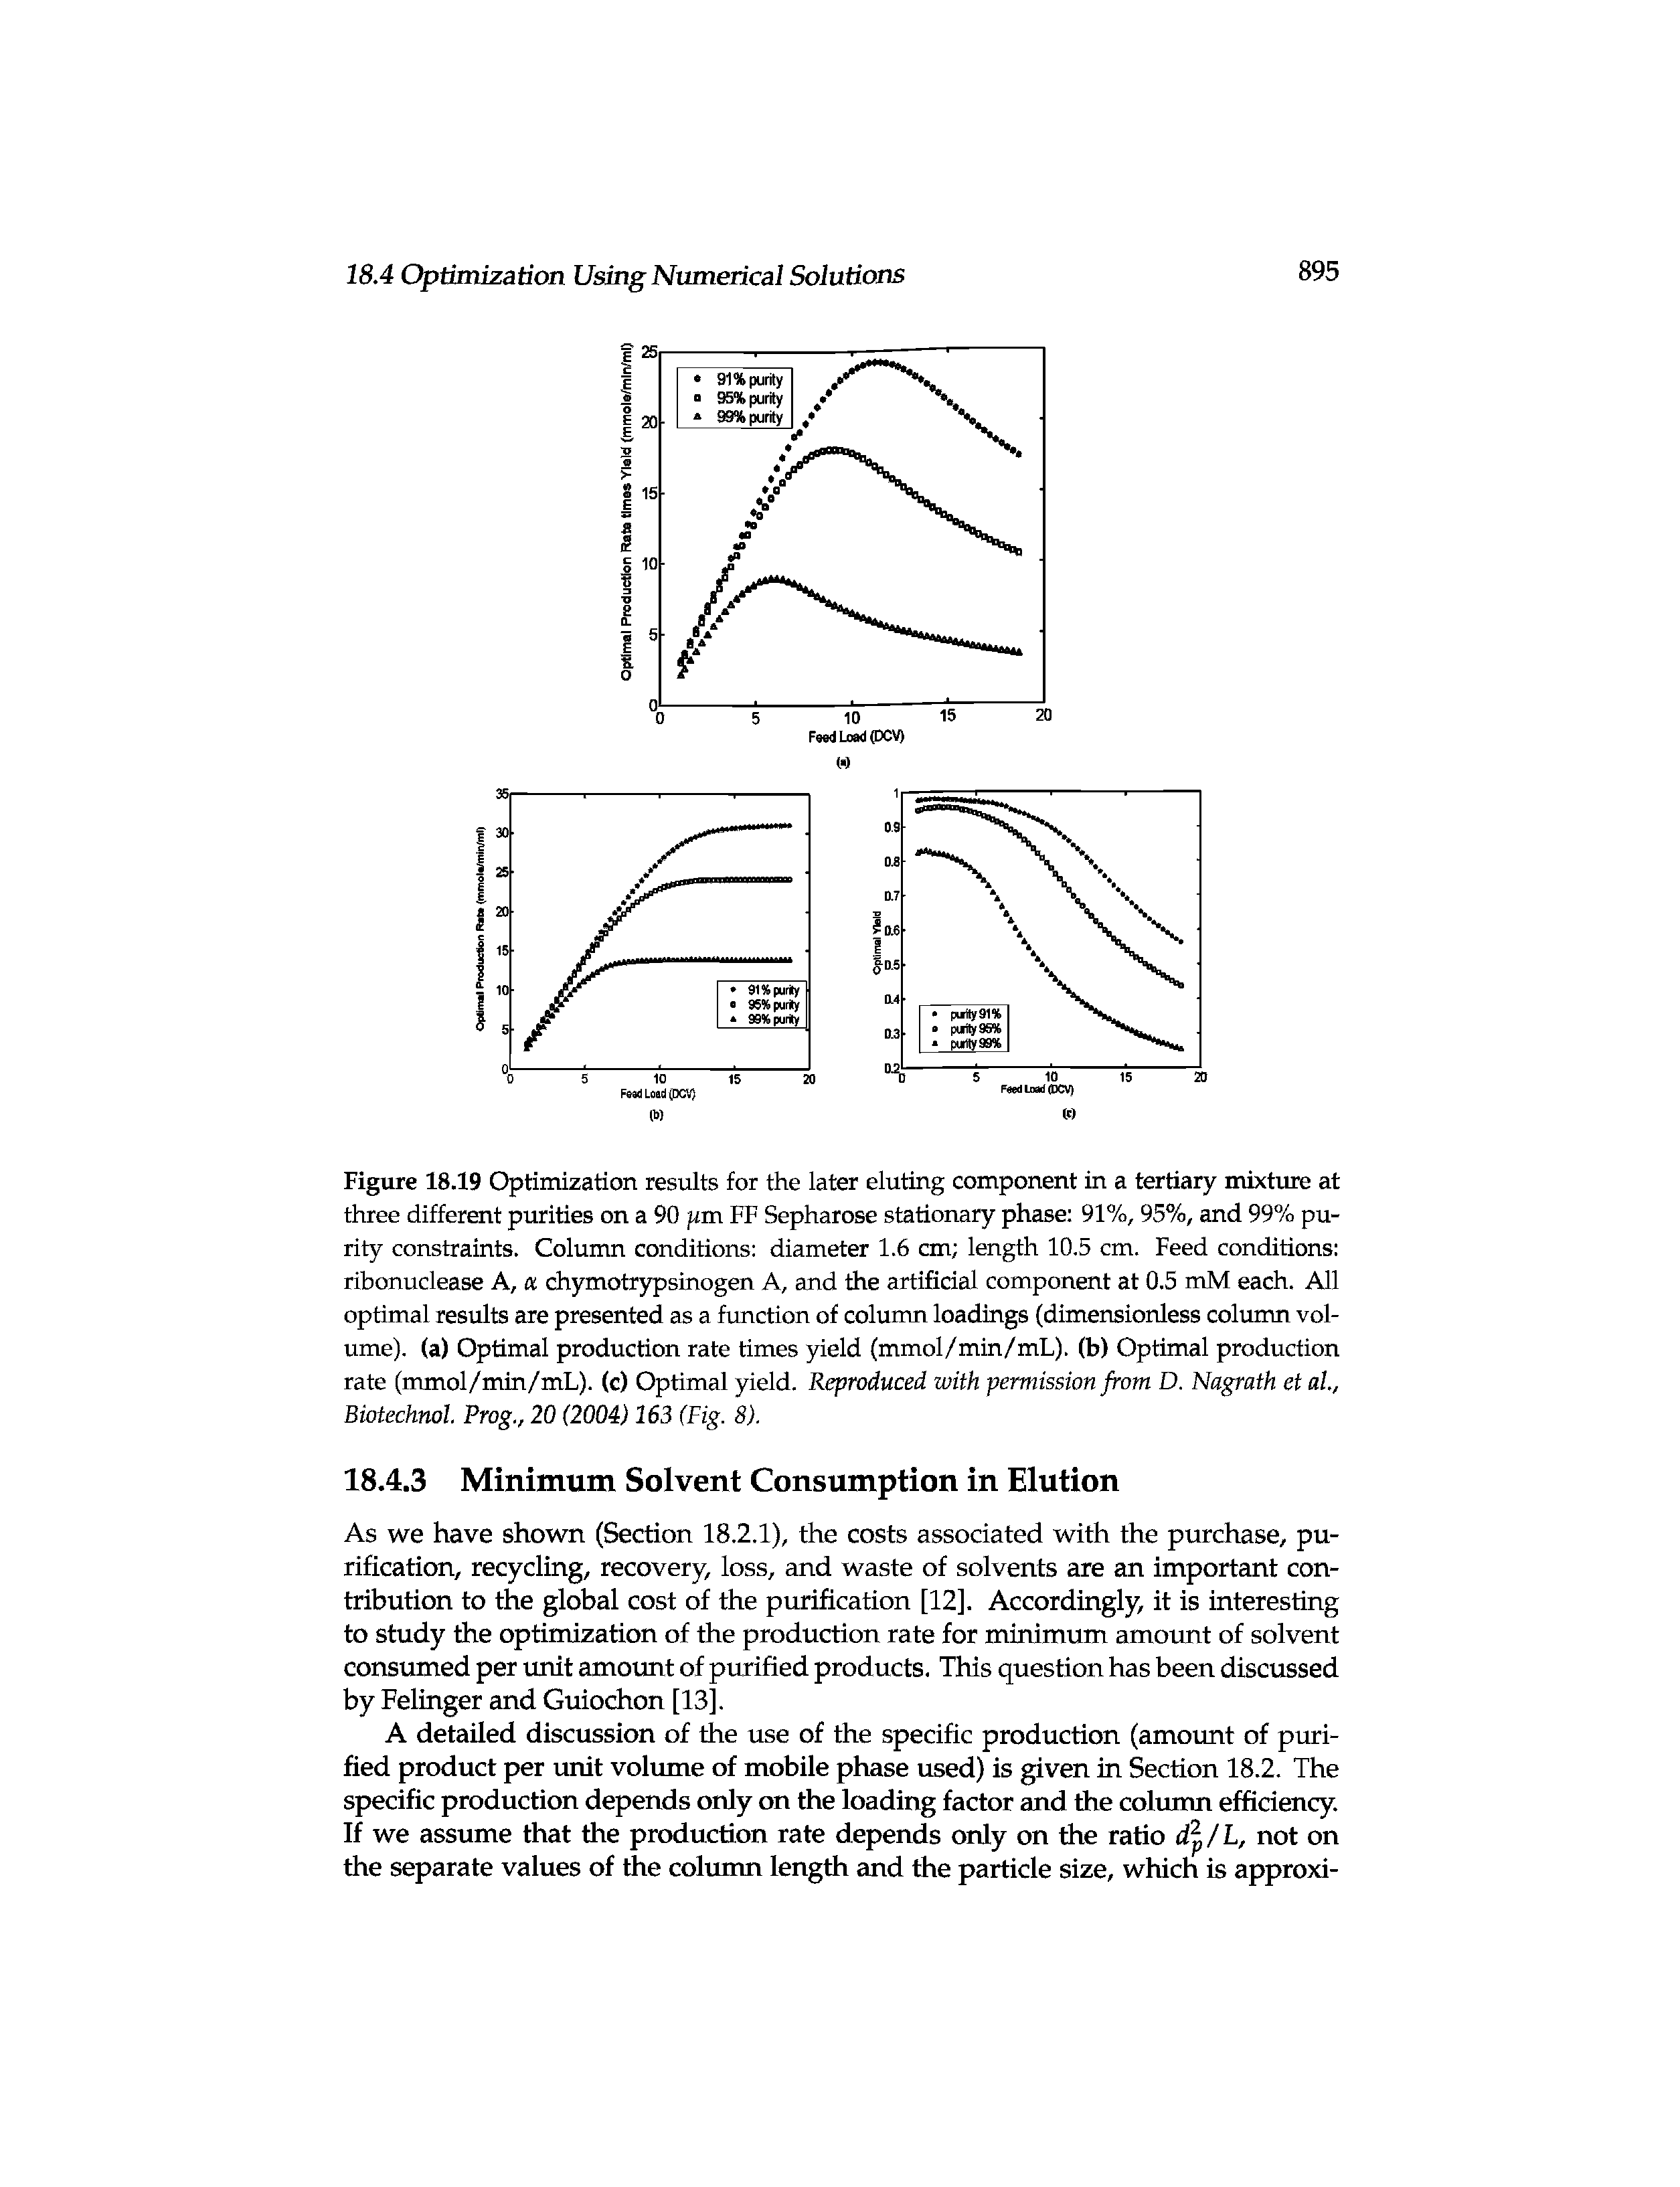 Figure 18.19 Optimization results for the later eluting component in a tertiary mixture at three different purities on a 90 m FF Sepharose stationary phase 91%, 95%, and 99% purity constraints. Column conditions diameter 1.6 cm length 10.5 cm. Feed conditions ribonuclease A, a chymotrypsinogen A, and the artificial component at 0.5 mM each. All optimal results are presented as a function of column loadings (dimensionless column volume). (a) Optimal production rate times yield (mmol/min/mL). (b) Optimal production rate (mmol/min/mL). (c) Optimal yield. Reproduced with permission from D. Nagrath et ah, Biotechnol. Prog., 20 (2004) 163 (Fig. 8).